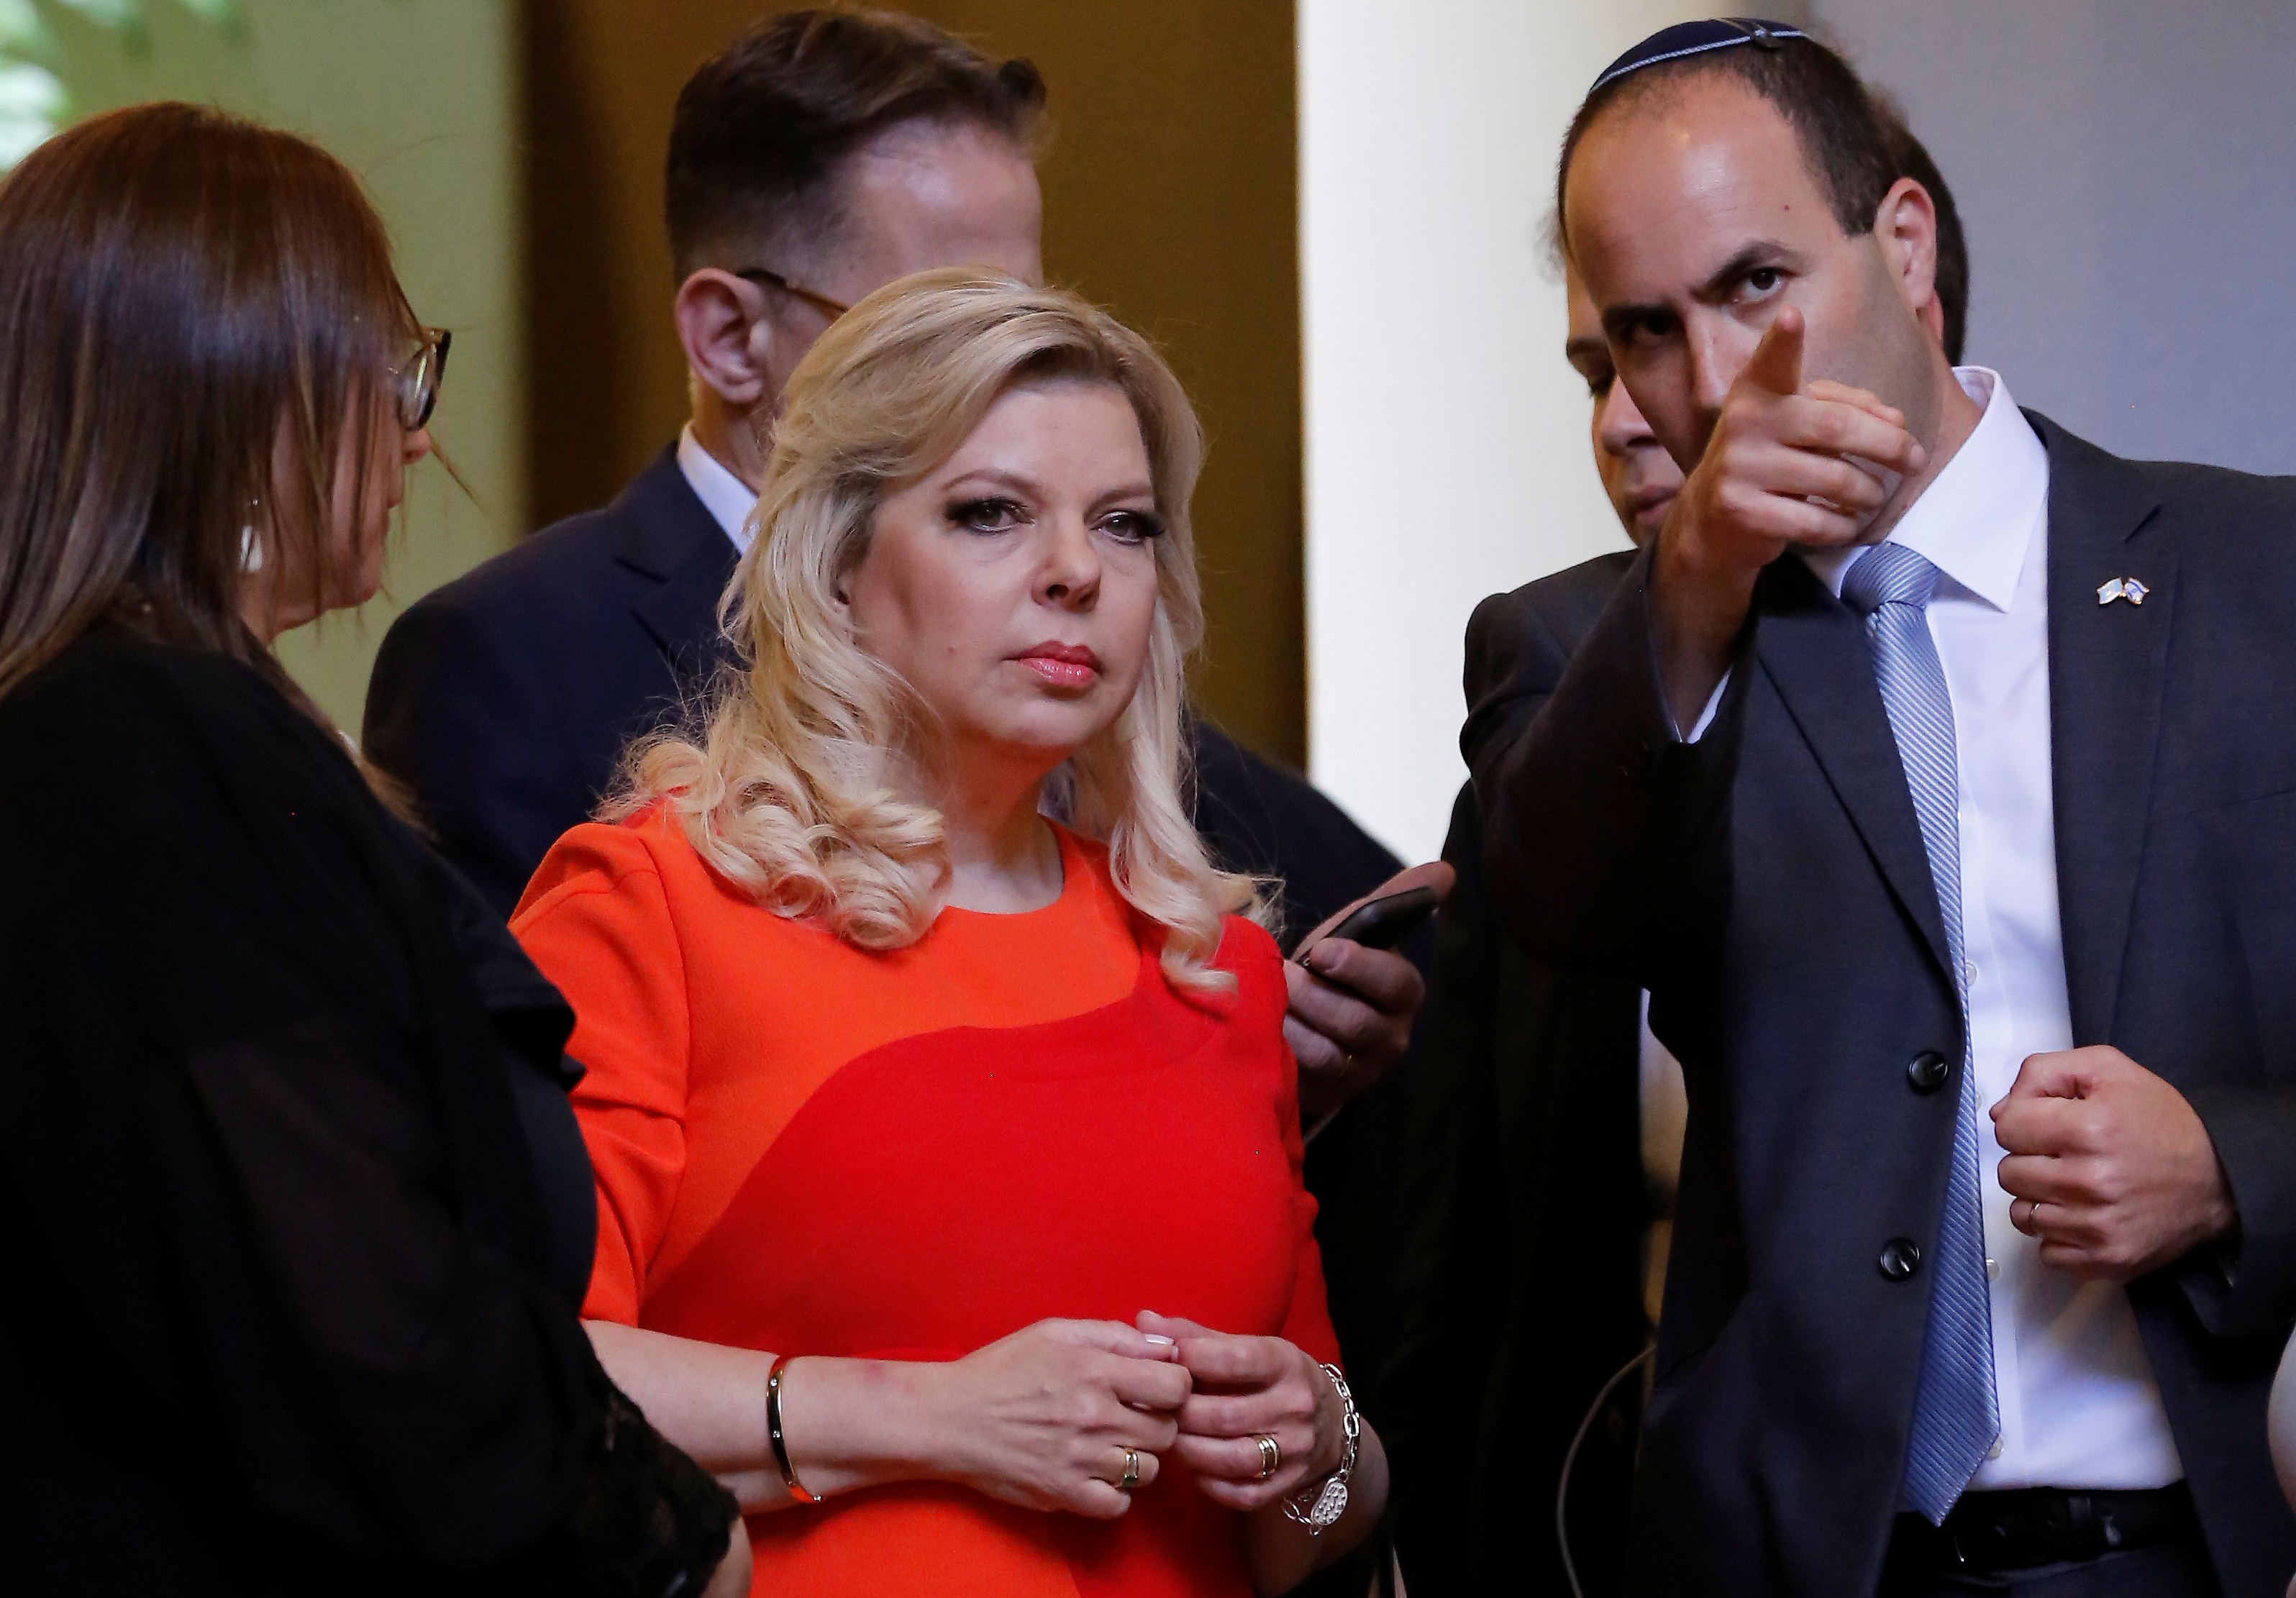 Sara Netanyahu, wife of Israeli Prime Minister Benjamin Netanyahu, listens to a member of her security staff after arriving to the National Palace in Guatemala City, Guatemala December 11, 2018. REUTERS/Luis Echeverria